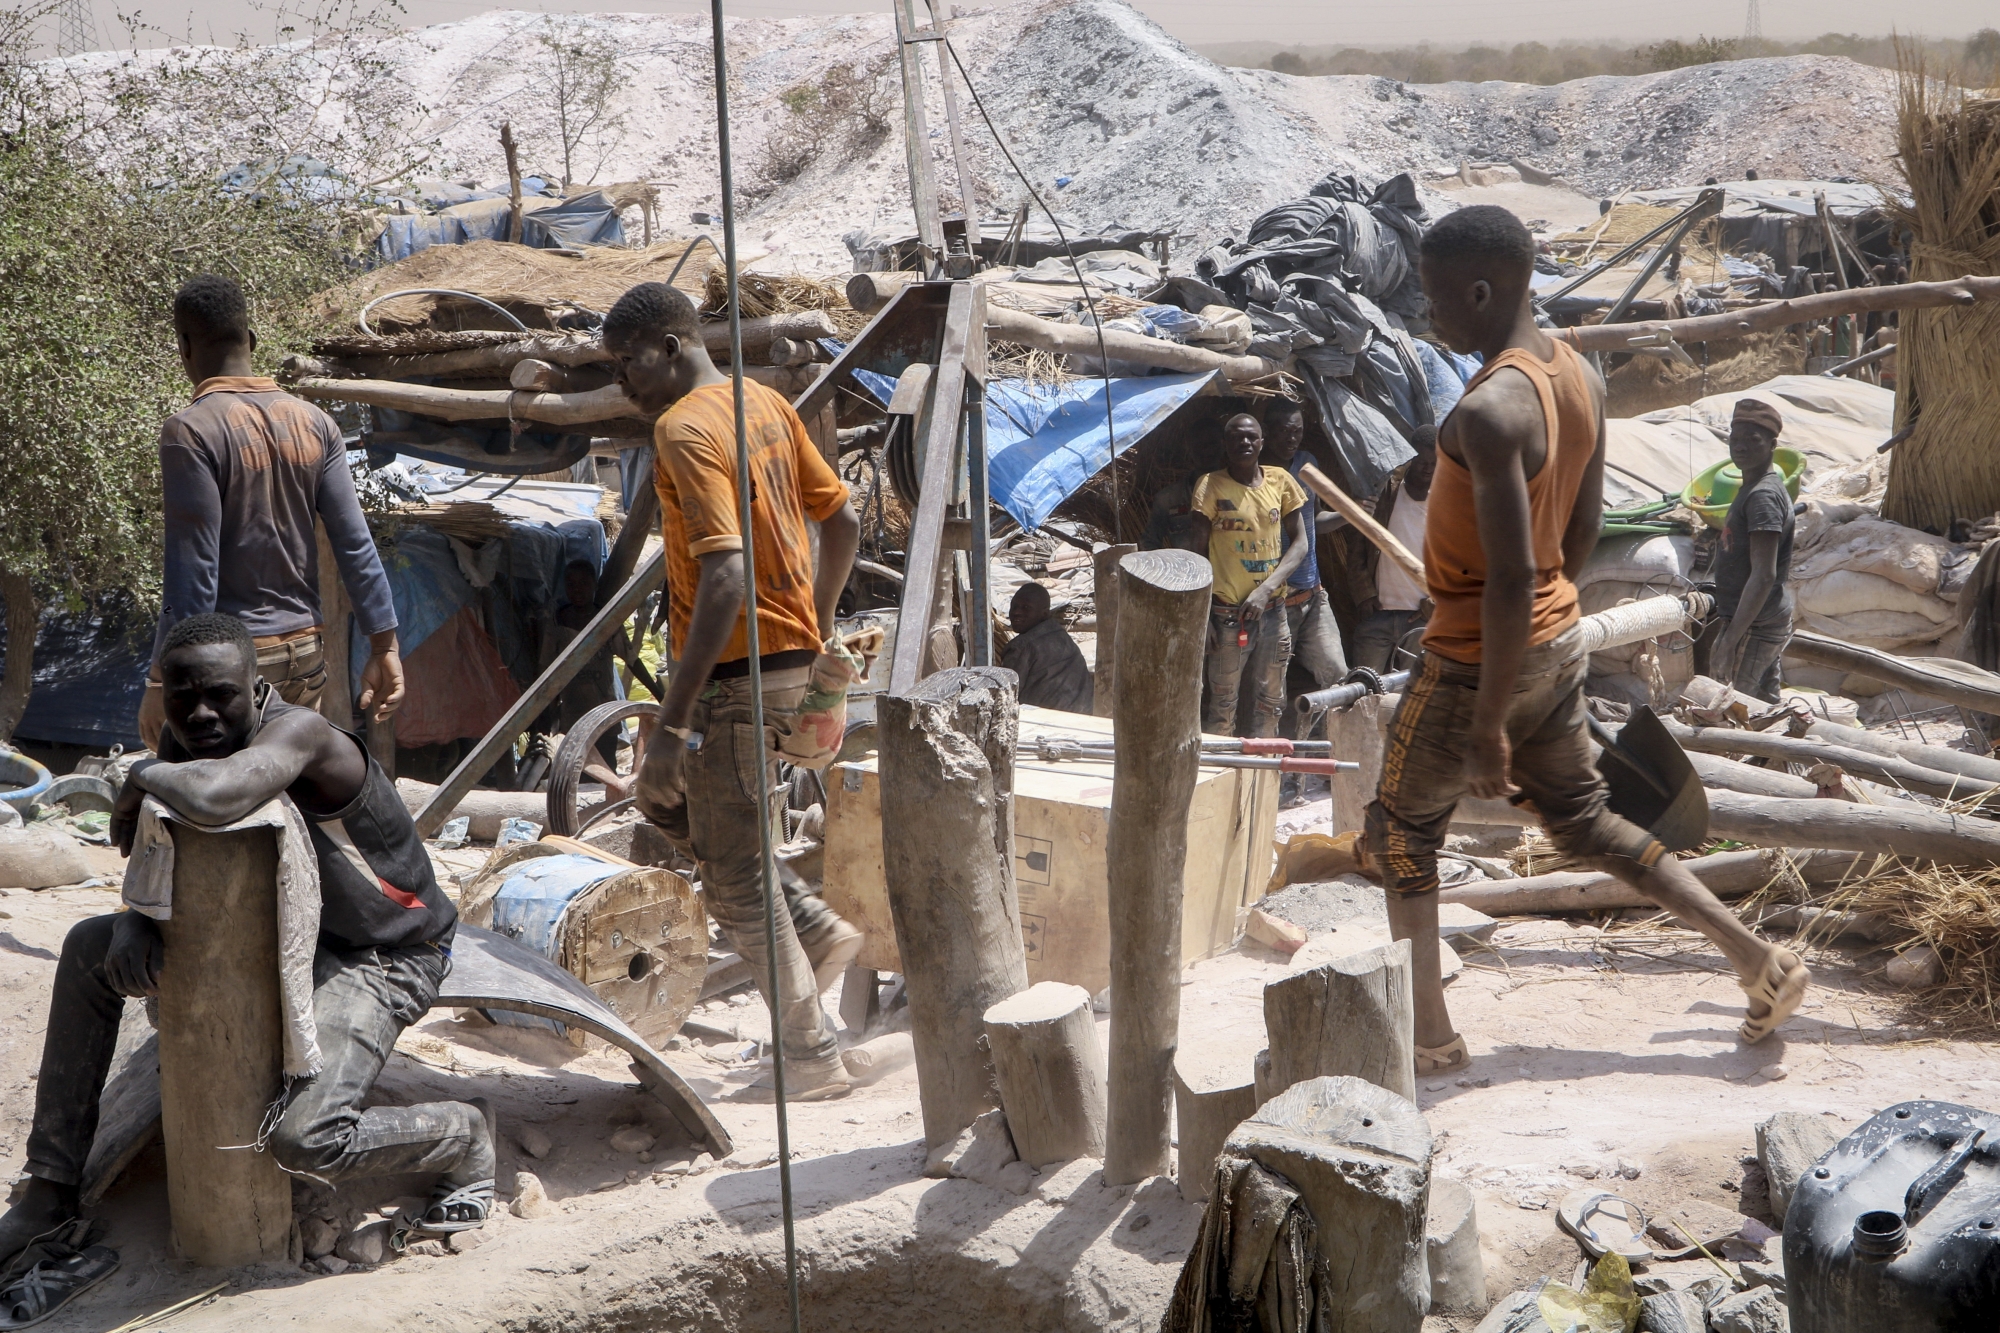 In this photo taken Sunday, Feb. 23, 2020, miners work at a gold mine in Bouda, Burkina Faso. A growing number of small-scale gold miners are out of work in Burkina Faso as jihadists try to seize control of the country's most lucrative industry. (AP Photo/Sam Mednick)
ArcInfo